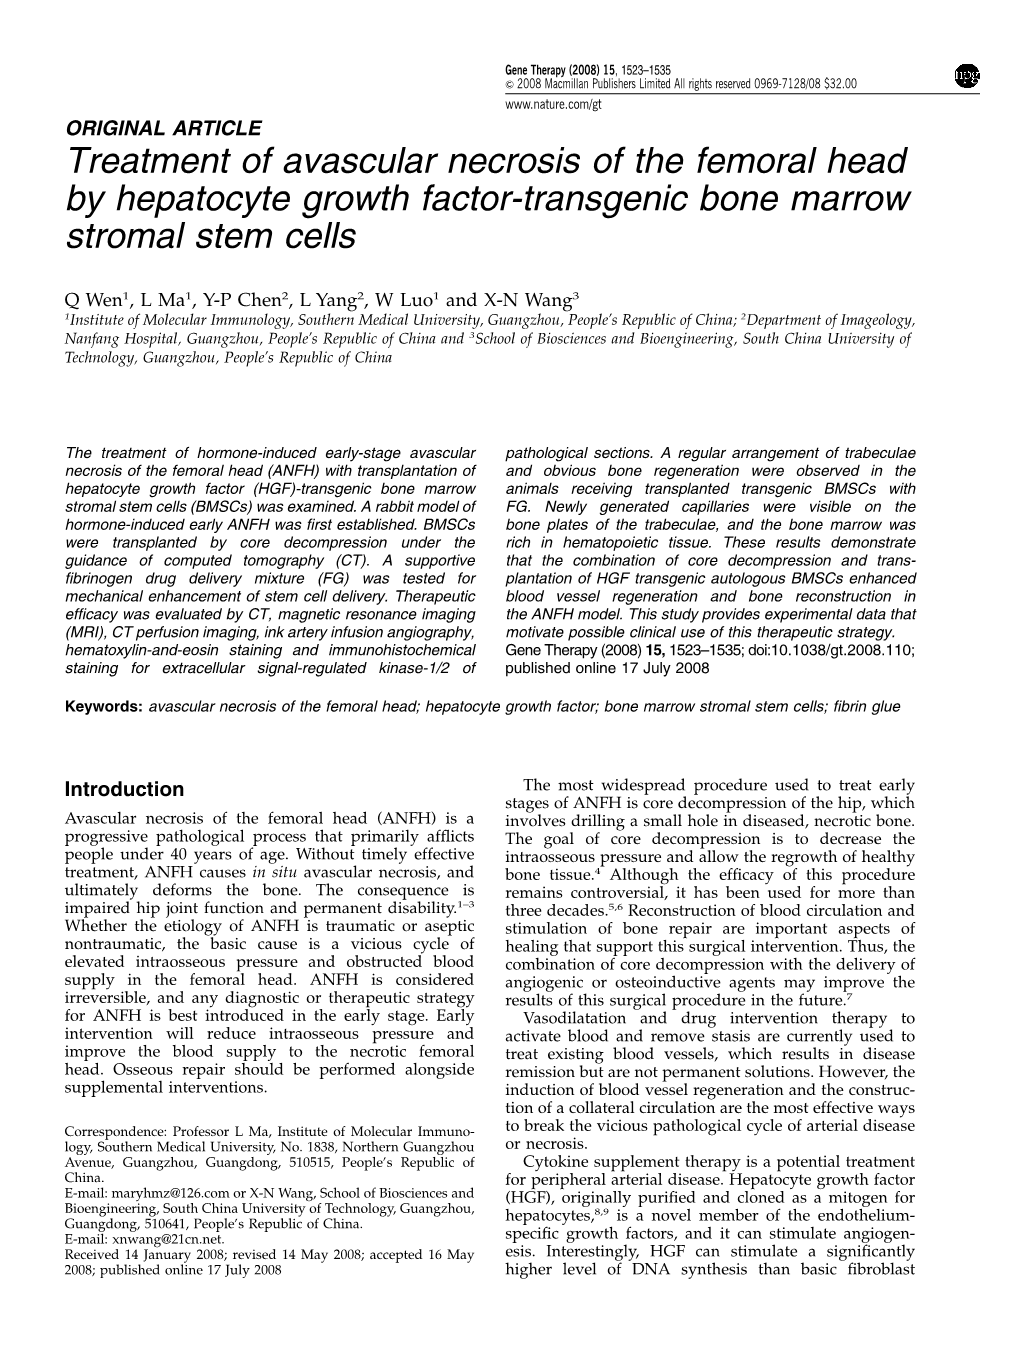 Treatment of Avascular Necrosis of the Femoral Head by Hepatocyte Growth Factor-Transgenic Bone Marrow Stromal Stem Cells